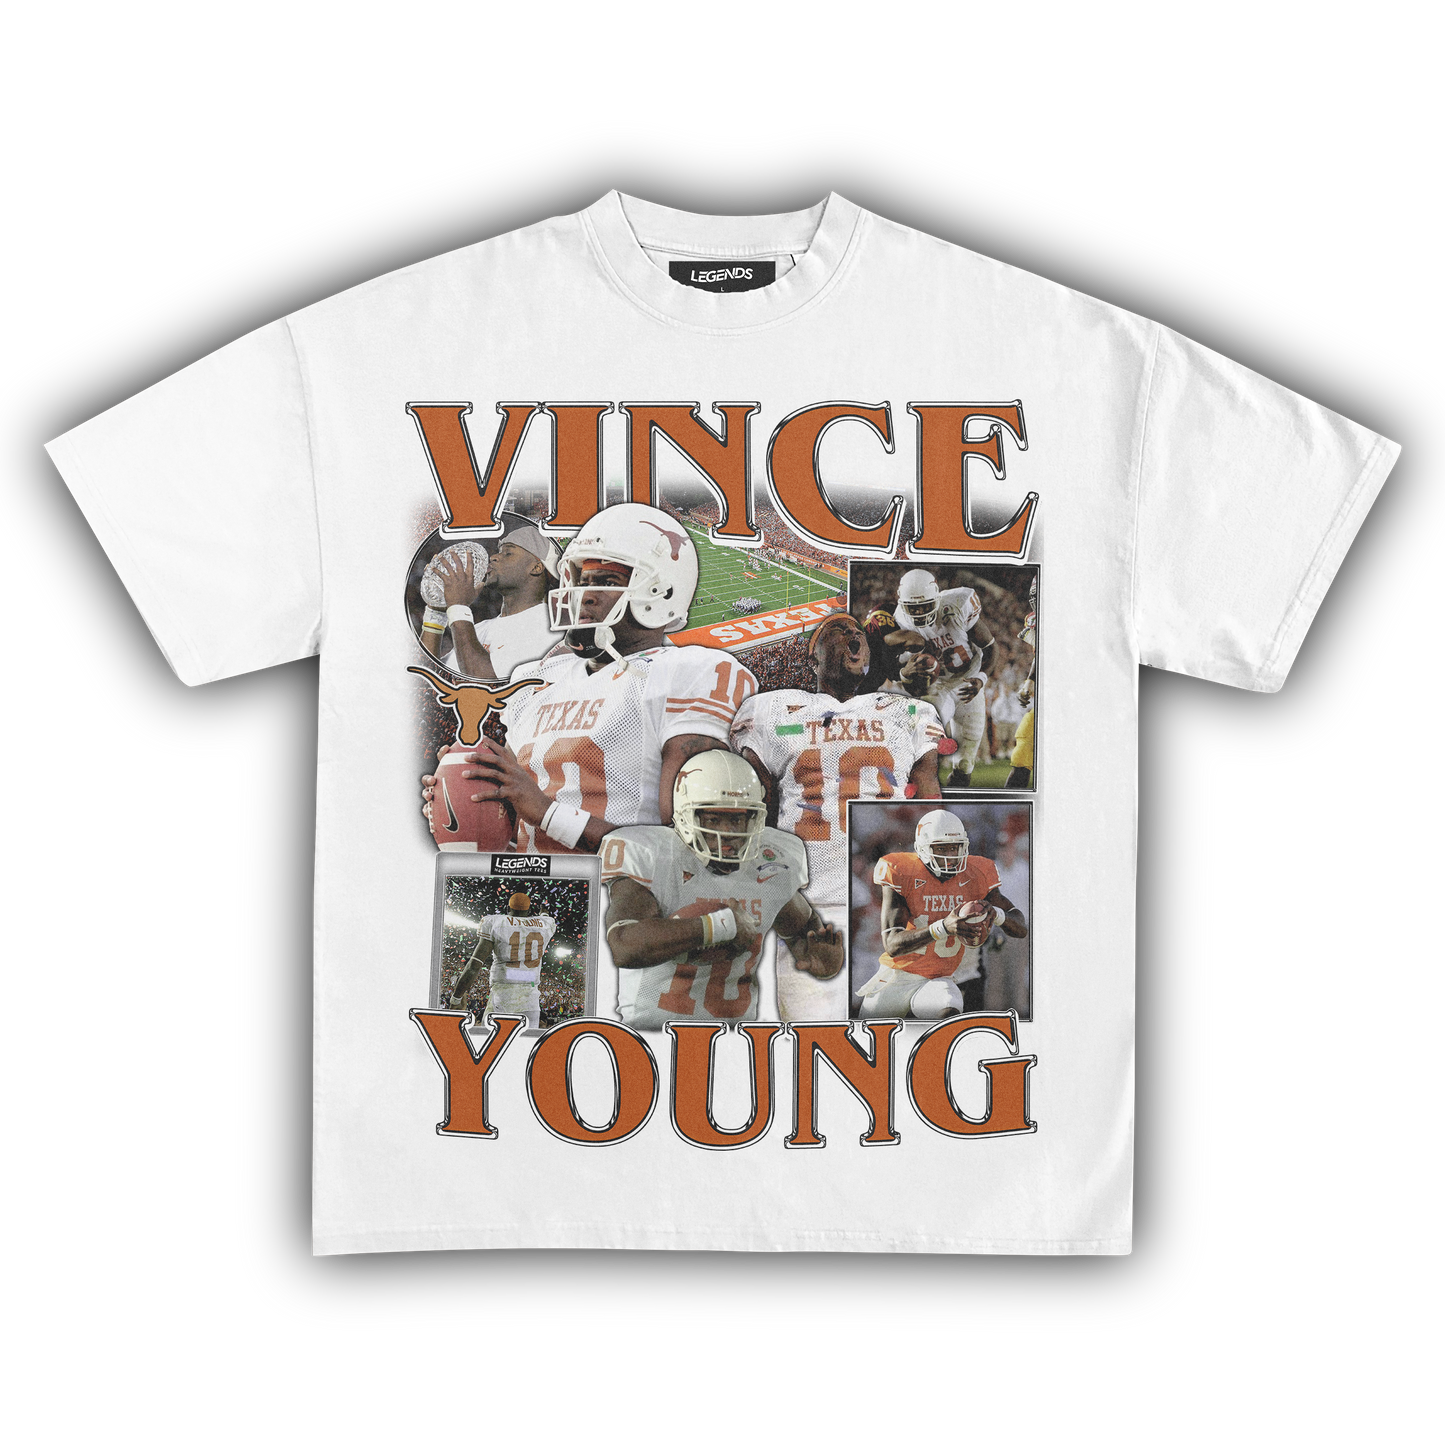 VINCE YOUNG LONGHORNS TEE